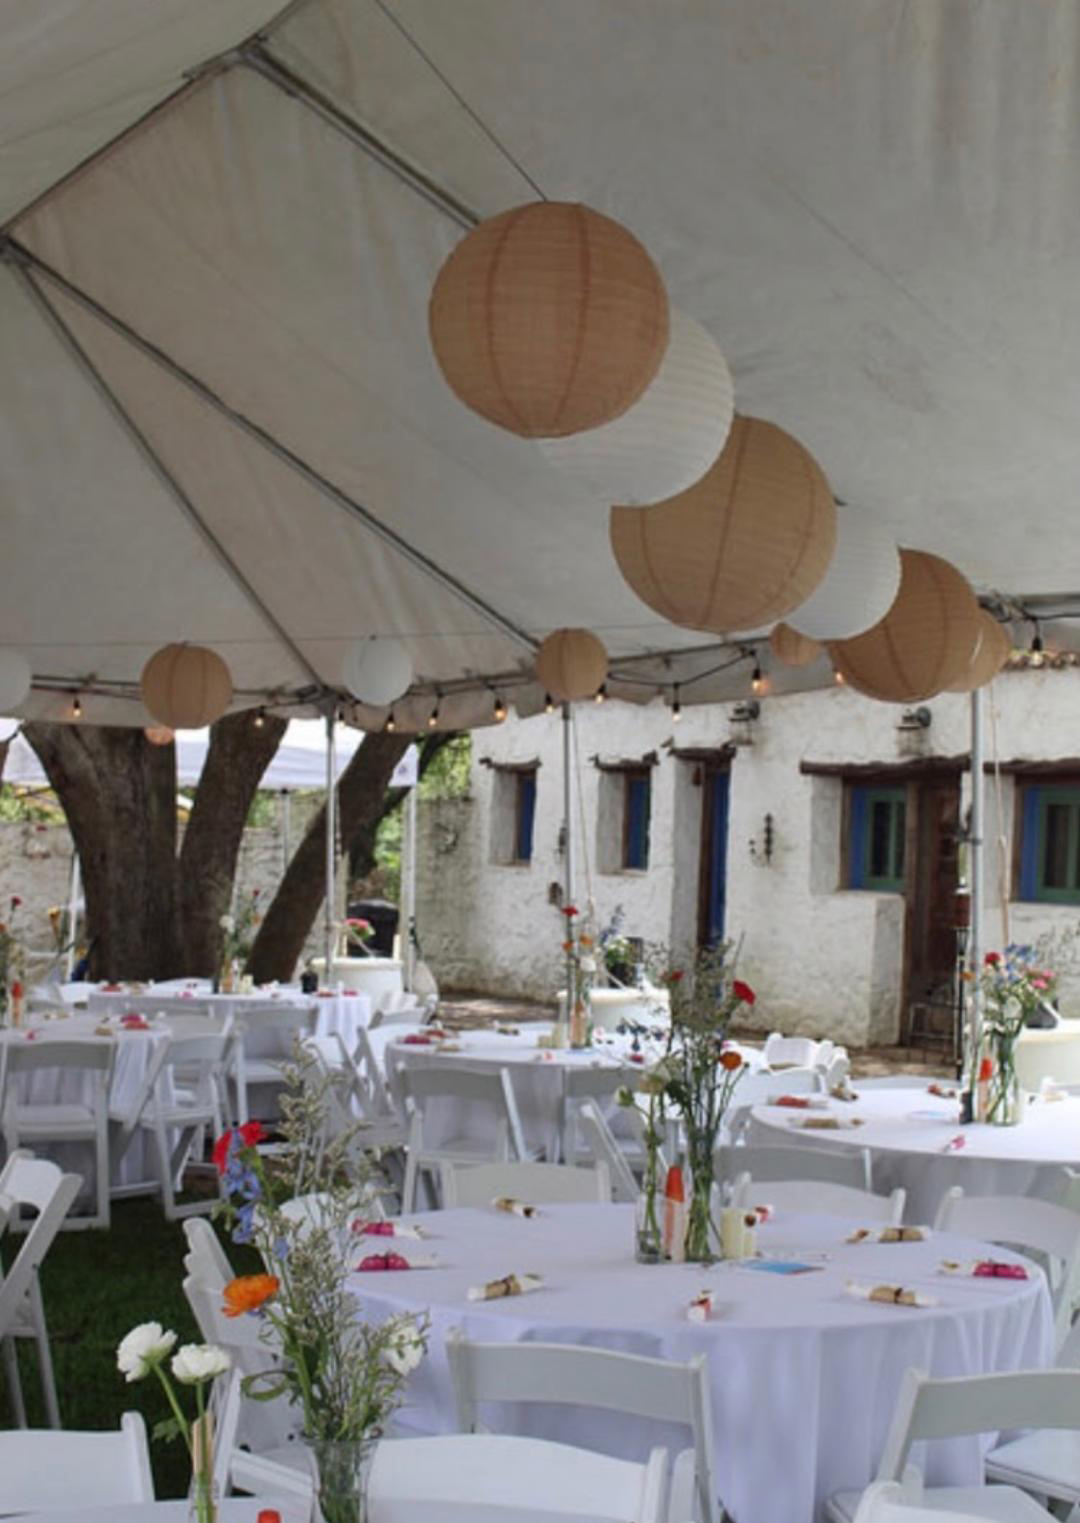 Whether at a venue or outside - Absolute Rentals has you covered.